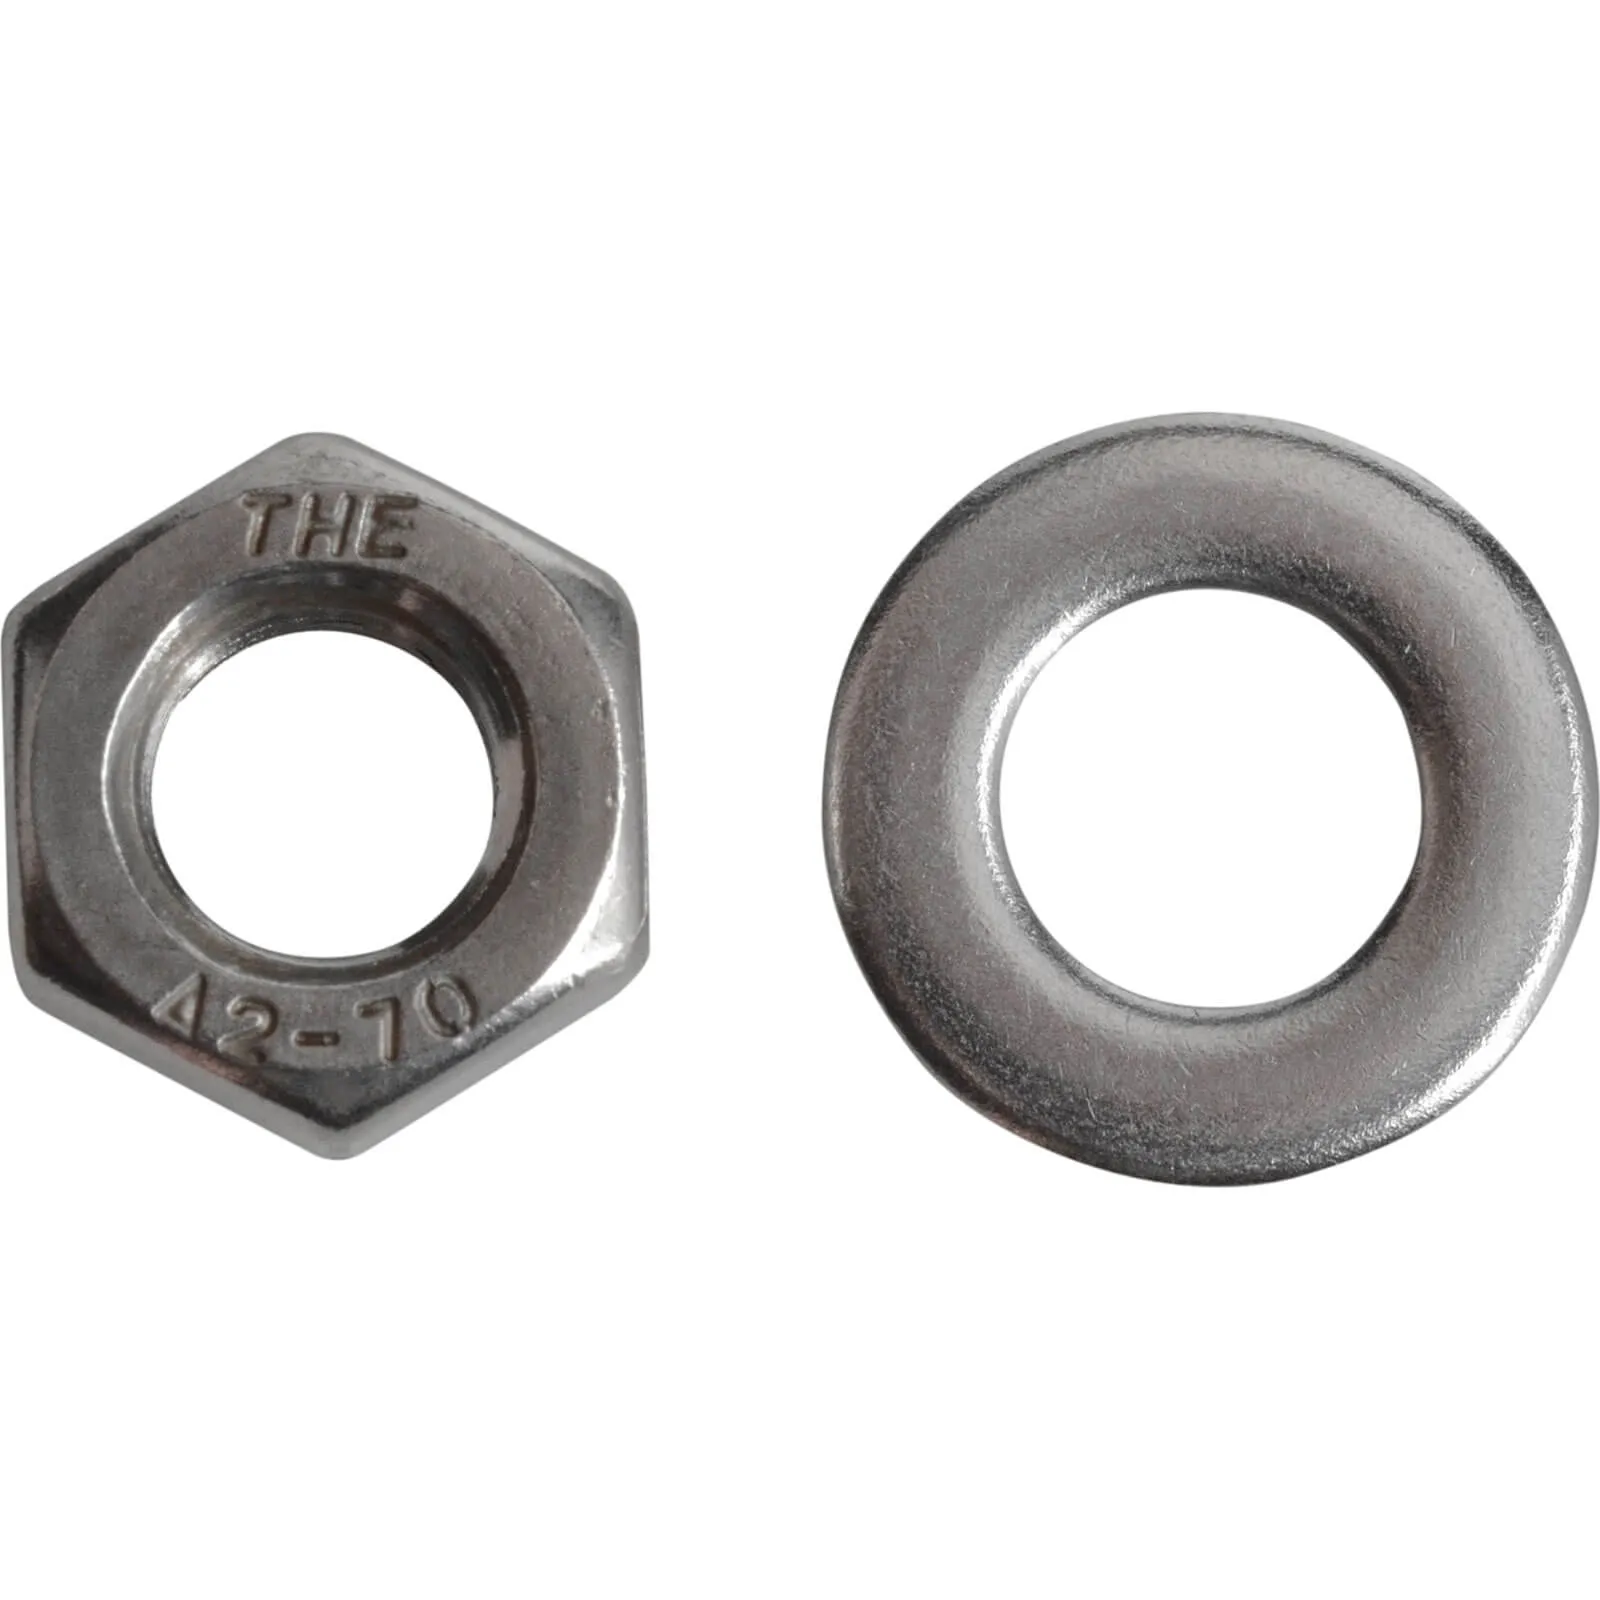 Forgefix A2 Stainless Steel Nuts and Washers - M8, Pack of 12